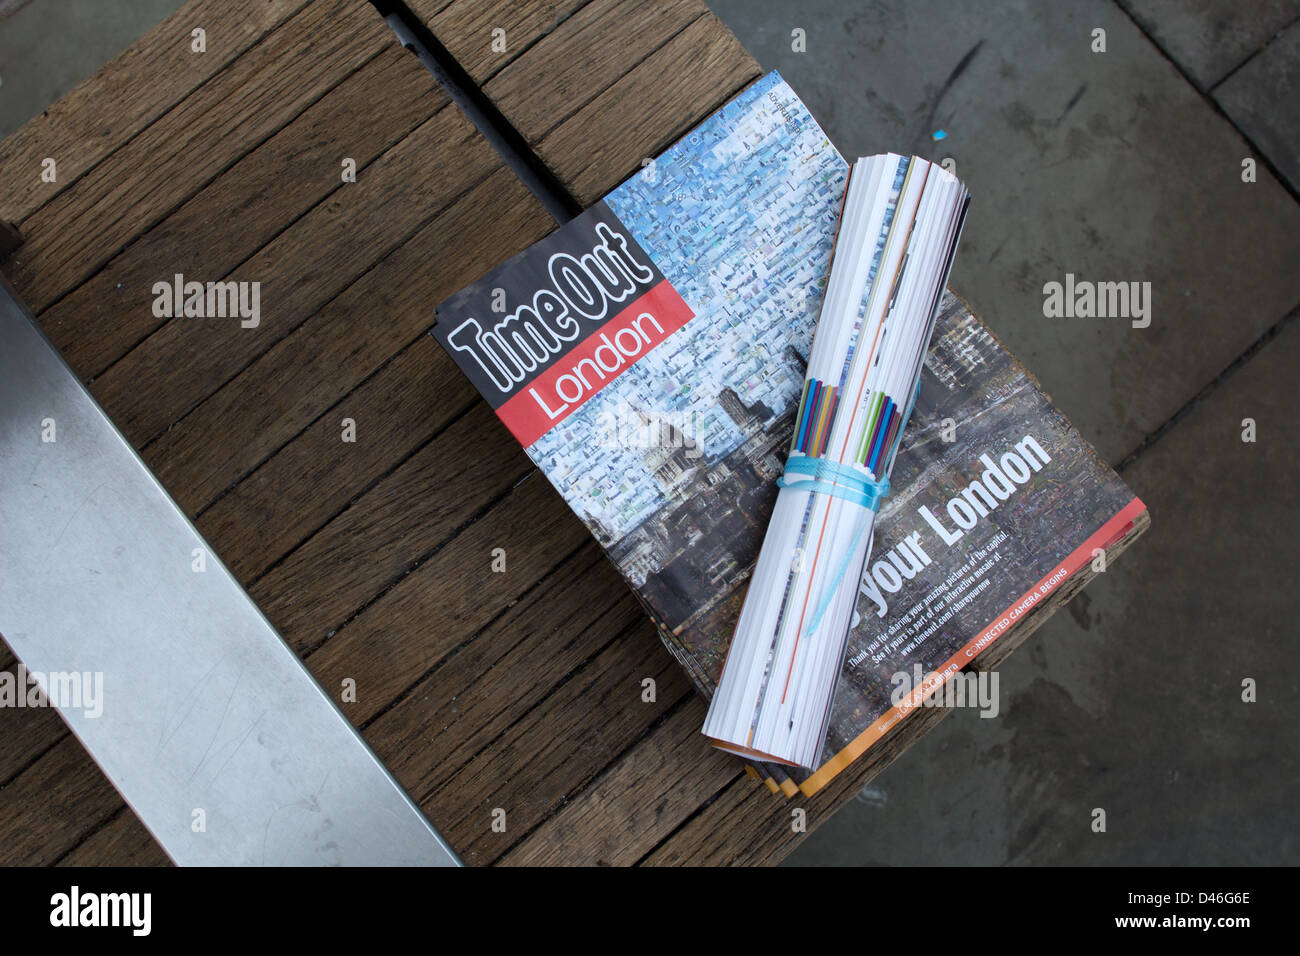 Copies of the free listing magazine Time Out, left out for collection by passers-by in central London. Stock Photo